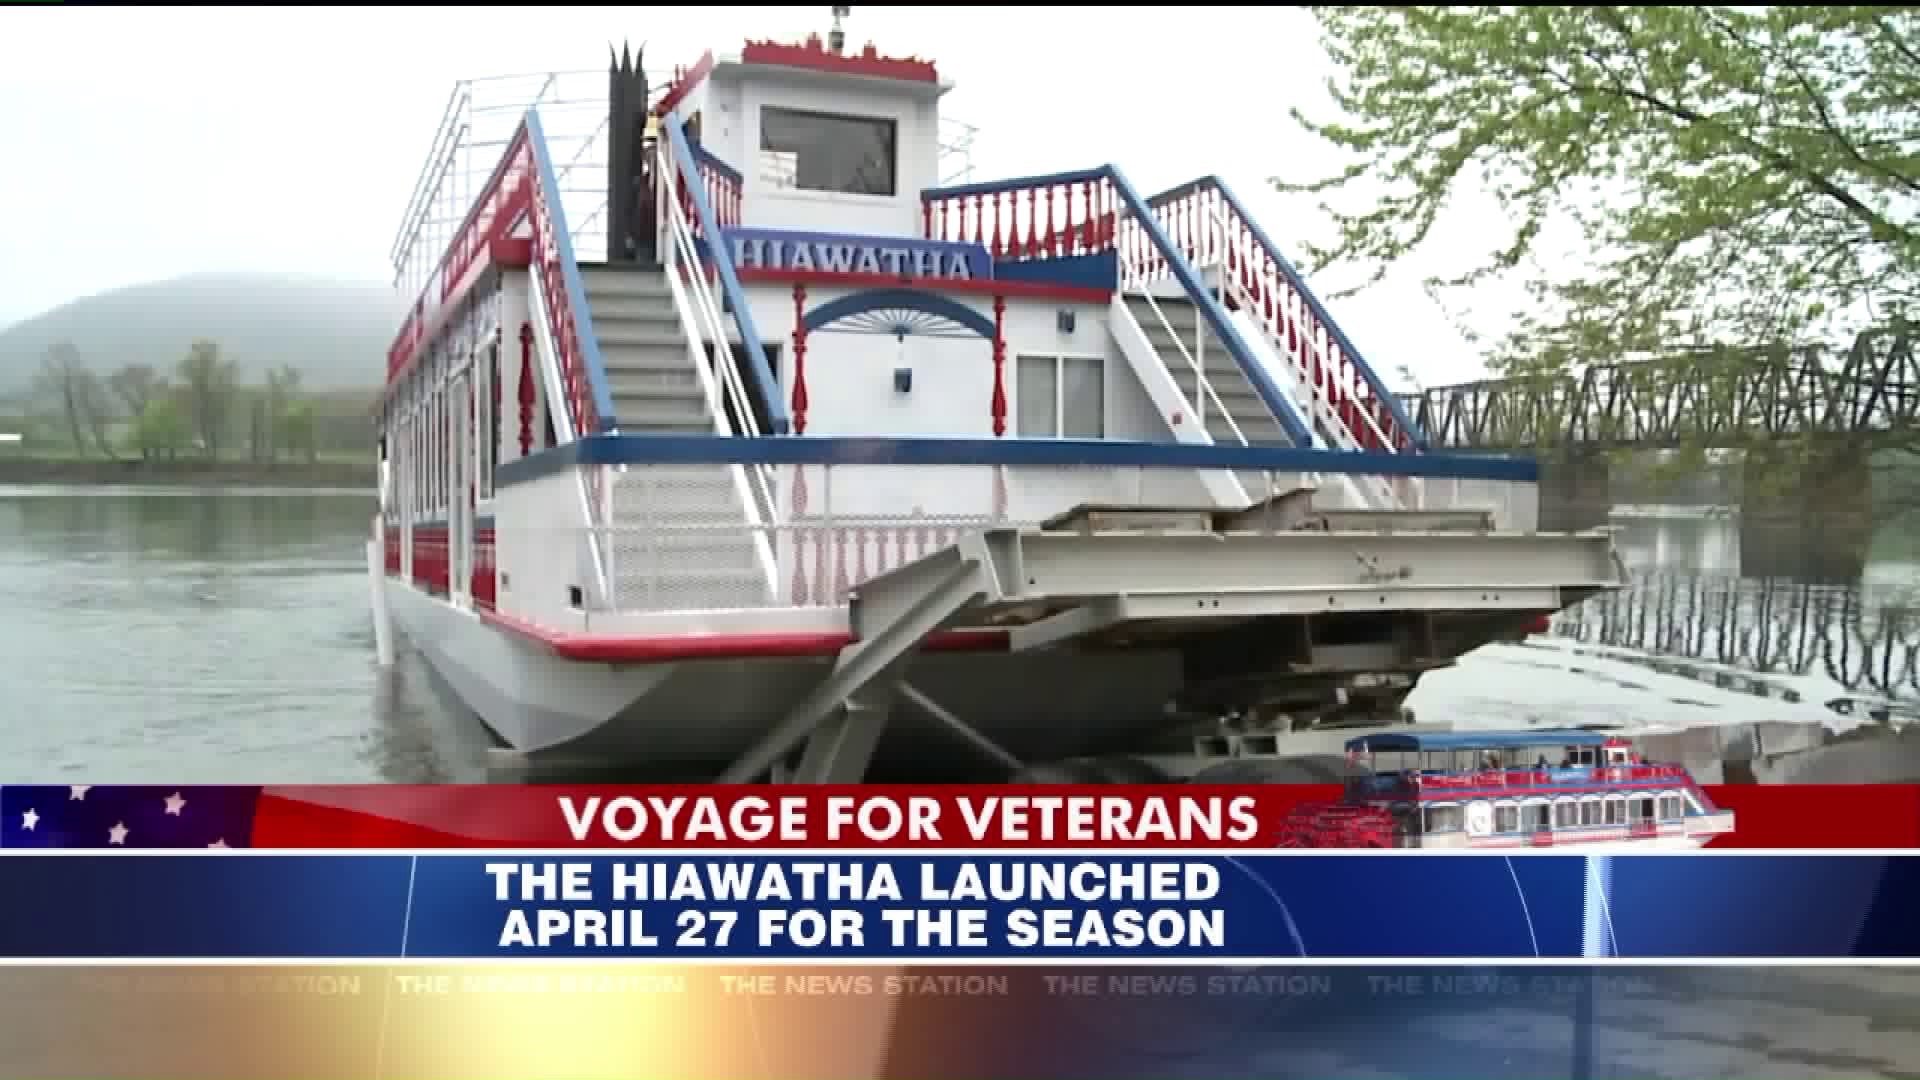 The Hiawatha Launched April 27 for the Season